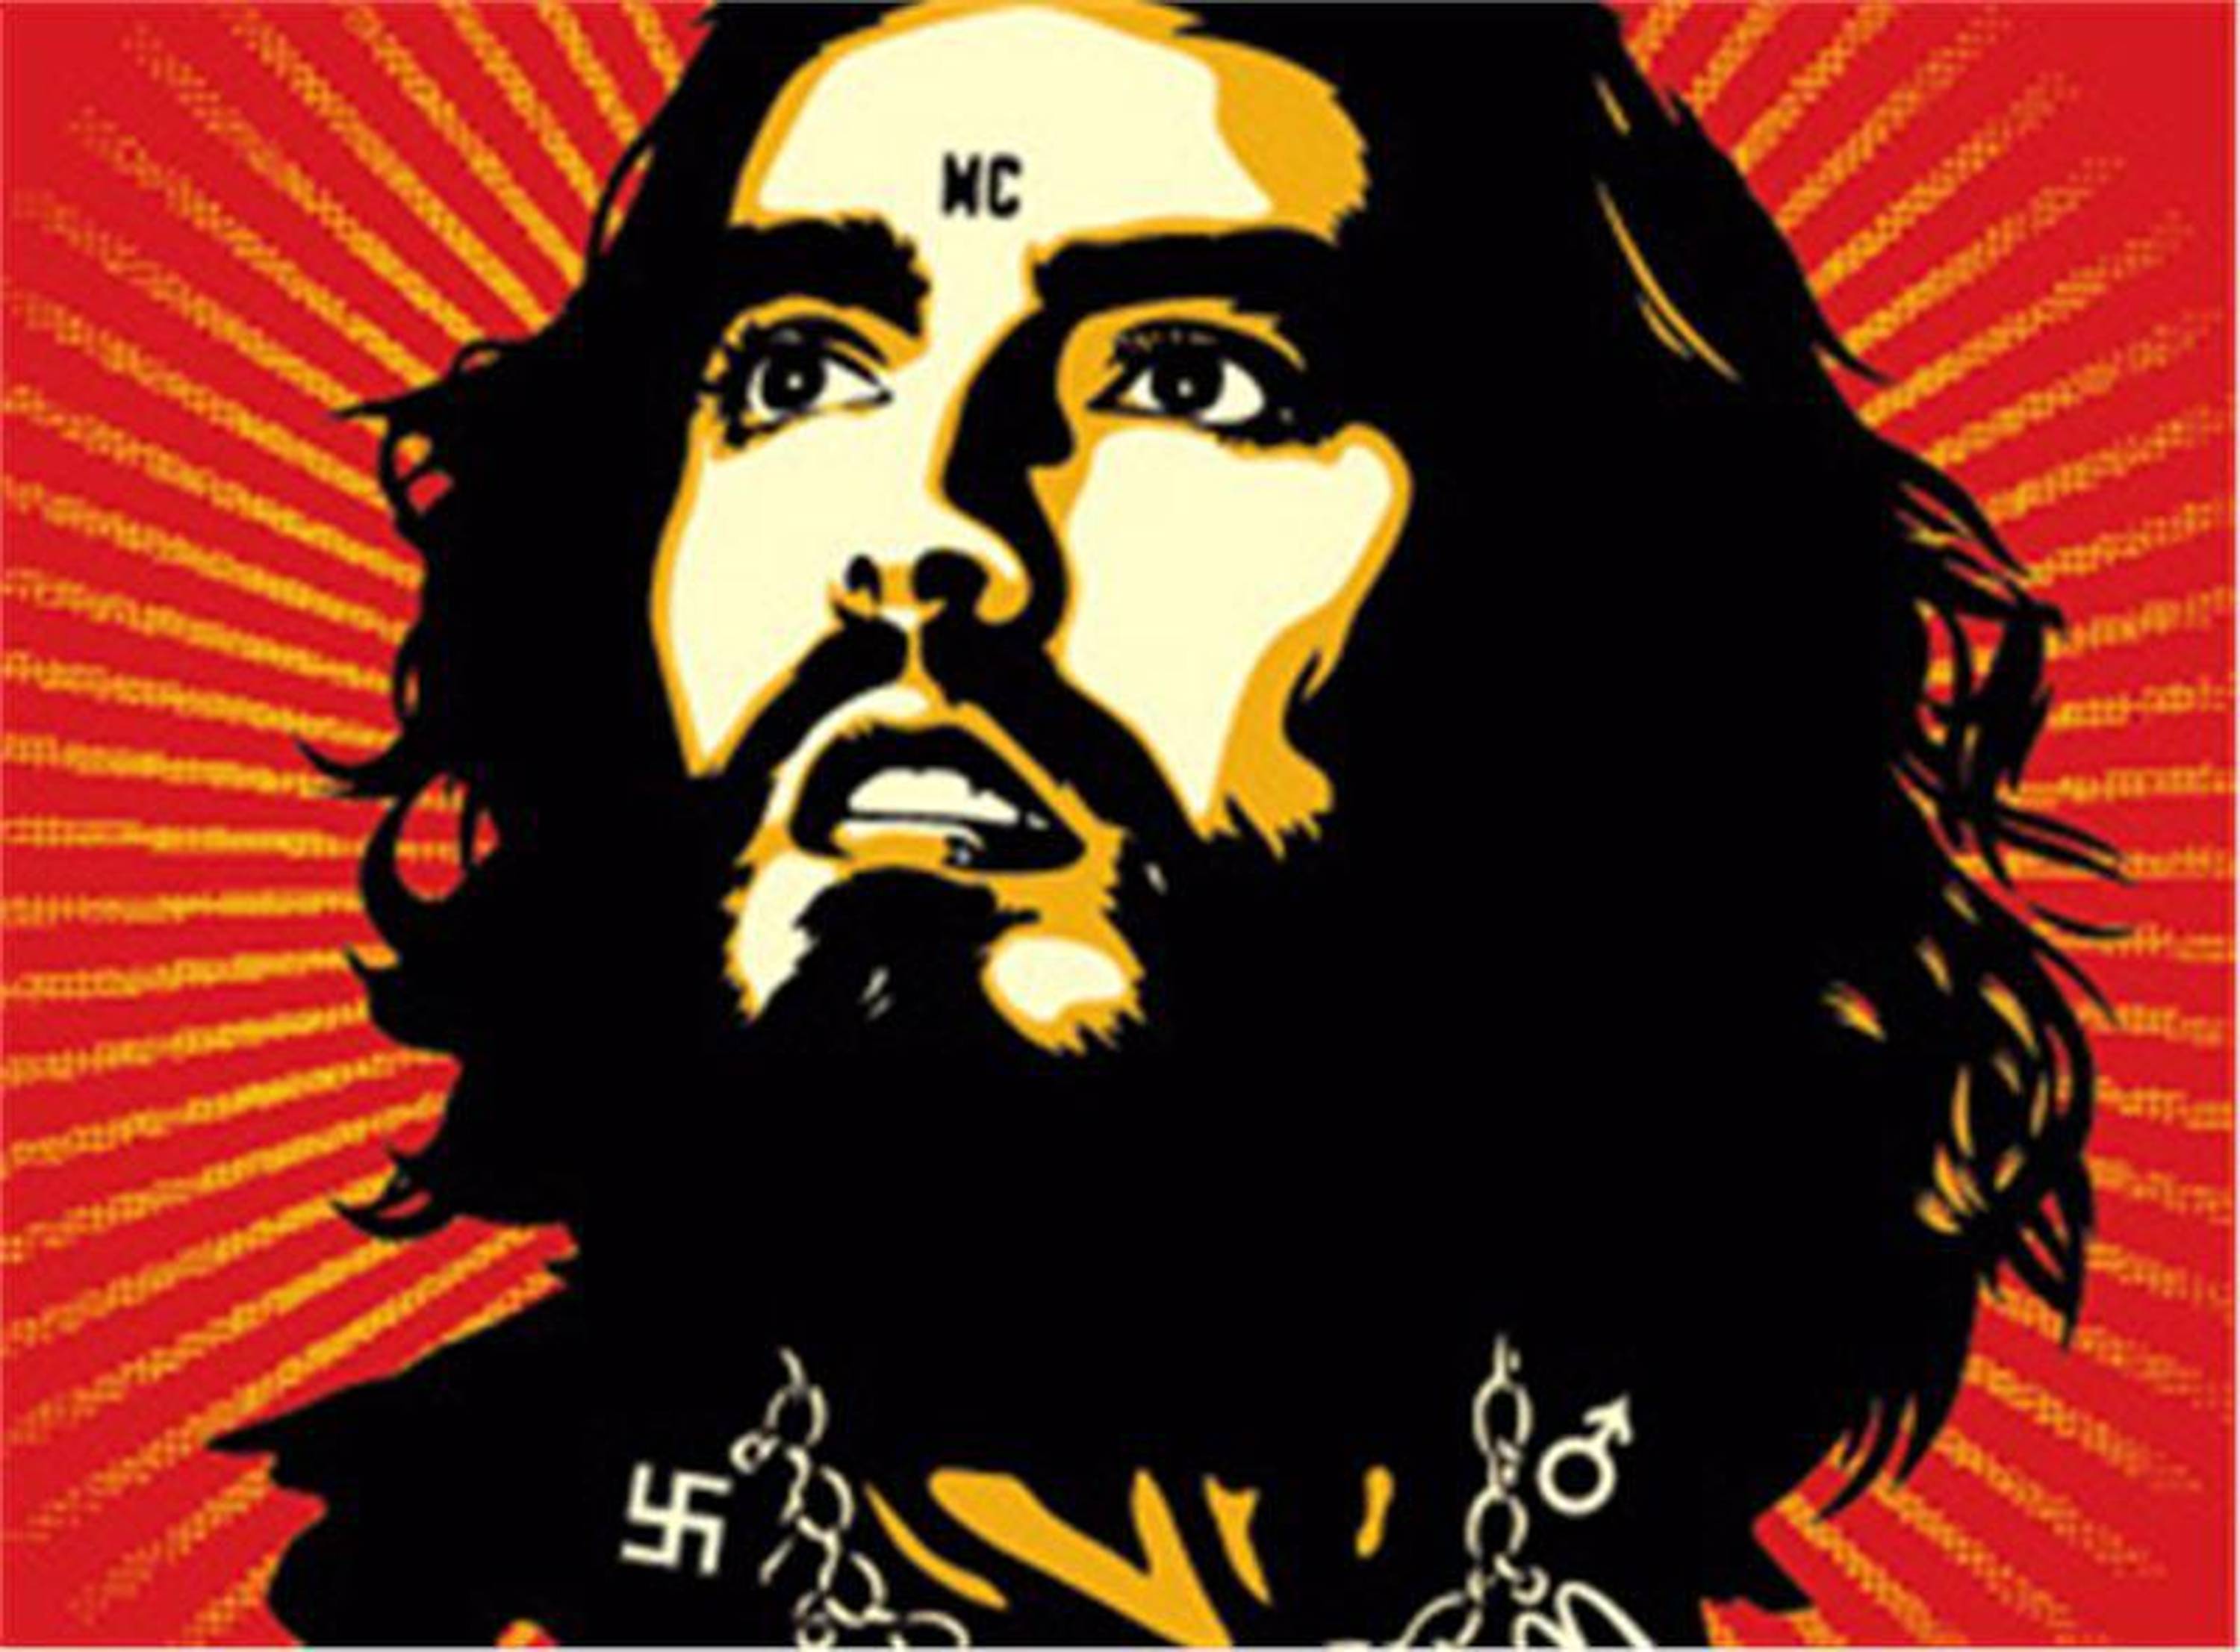 russell brand messiah complex